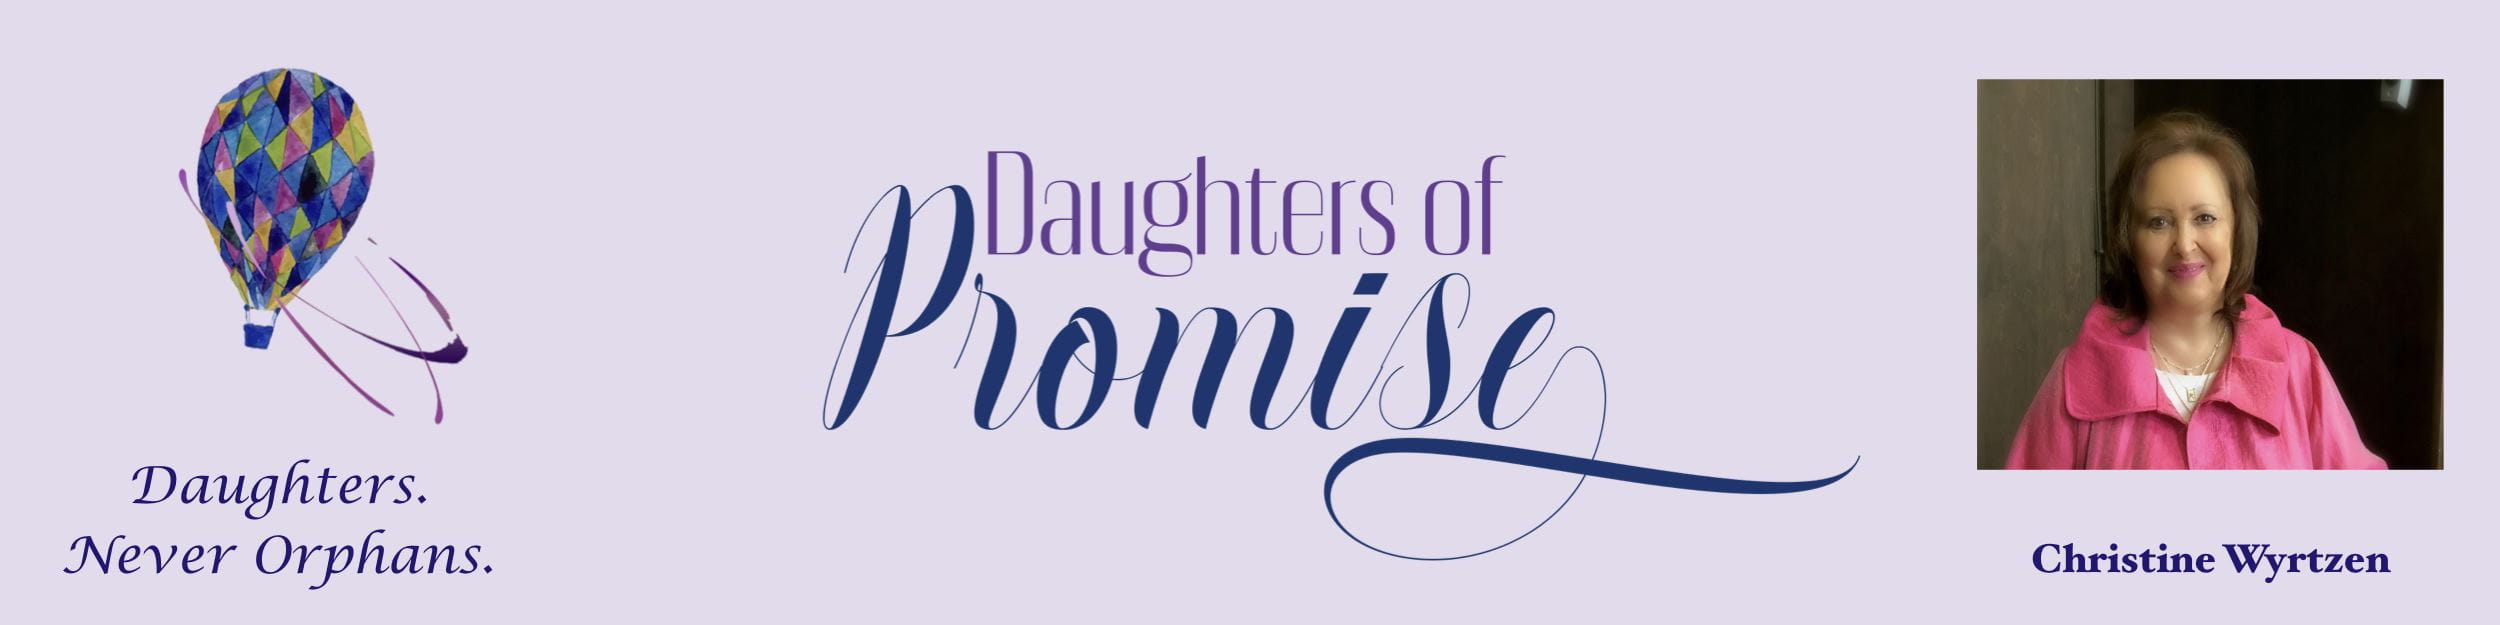 Greeting Death For the First Time - Daughters of Promise - January 22